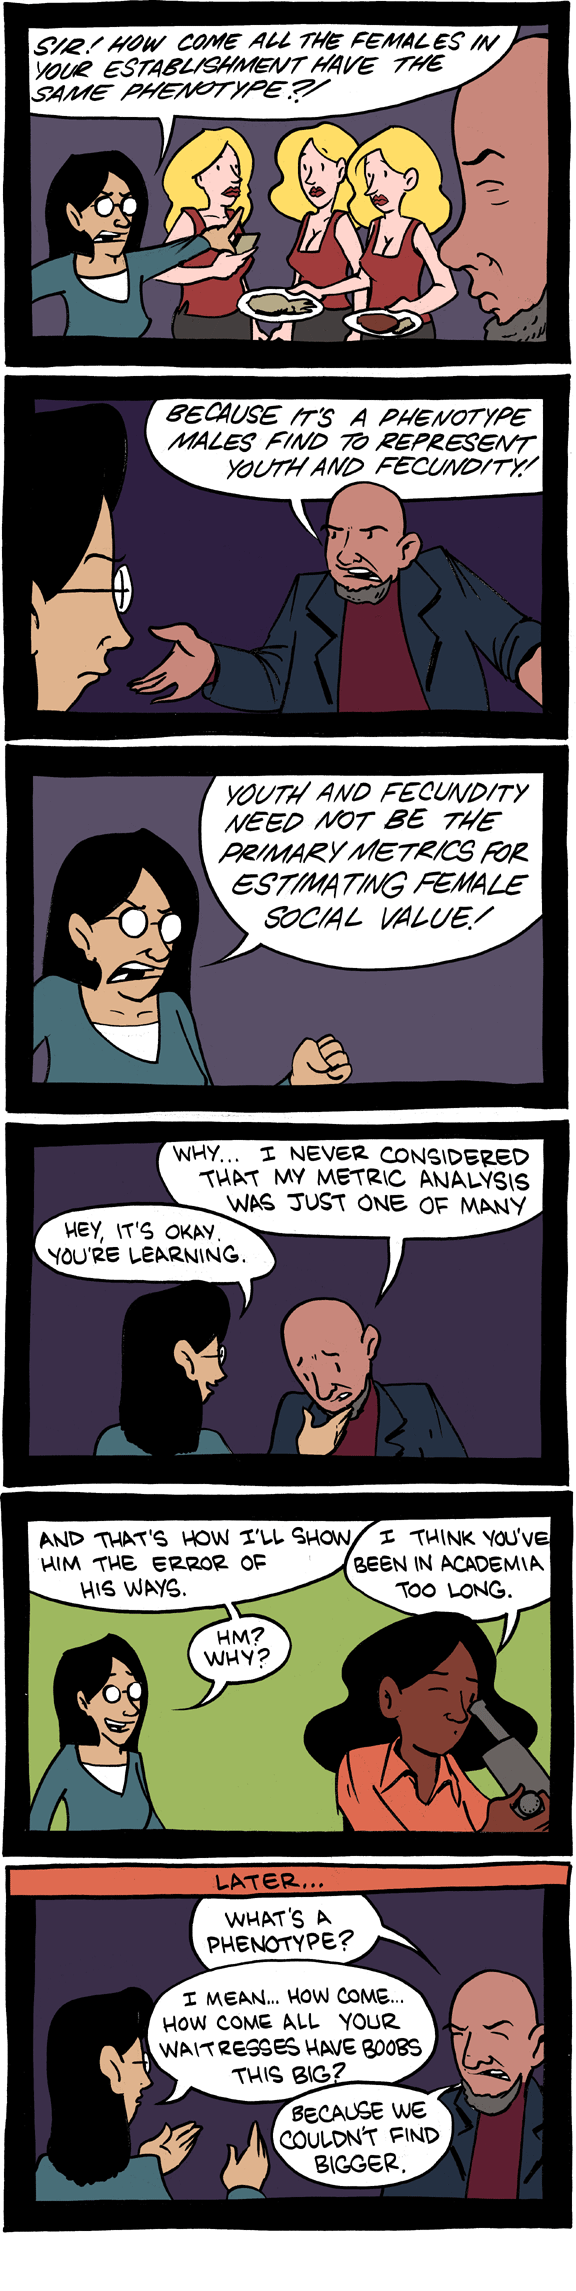 Saturday Morning Breakfast Cereal. [source]